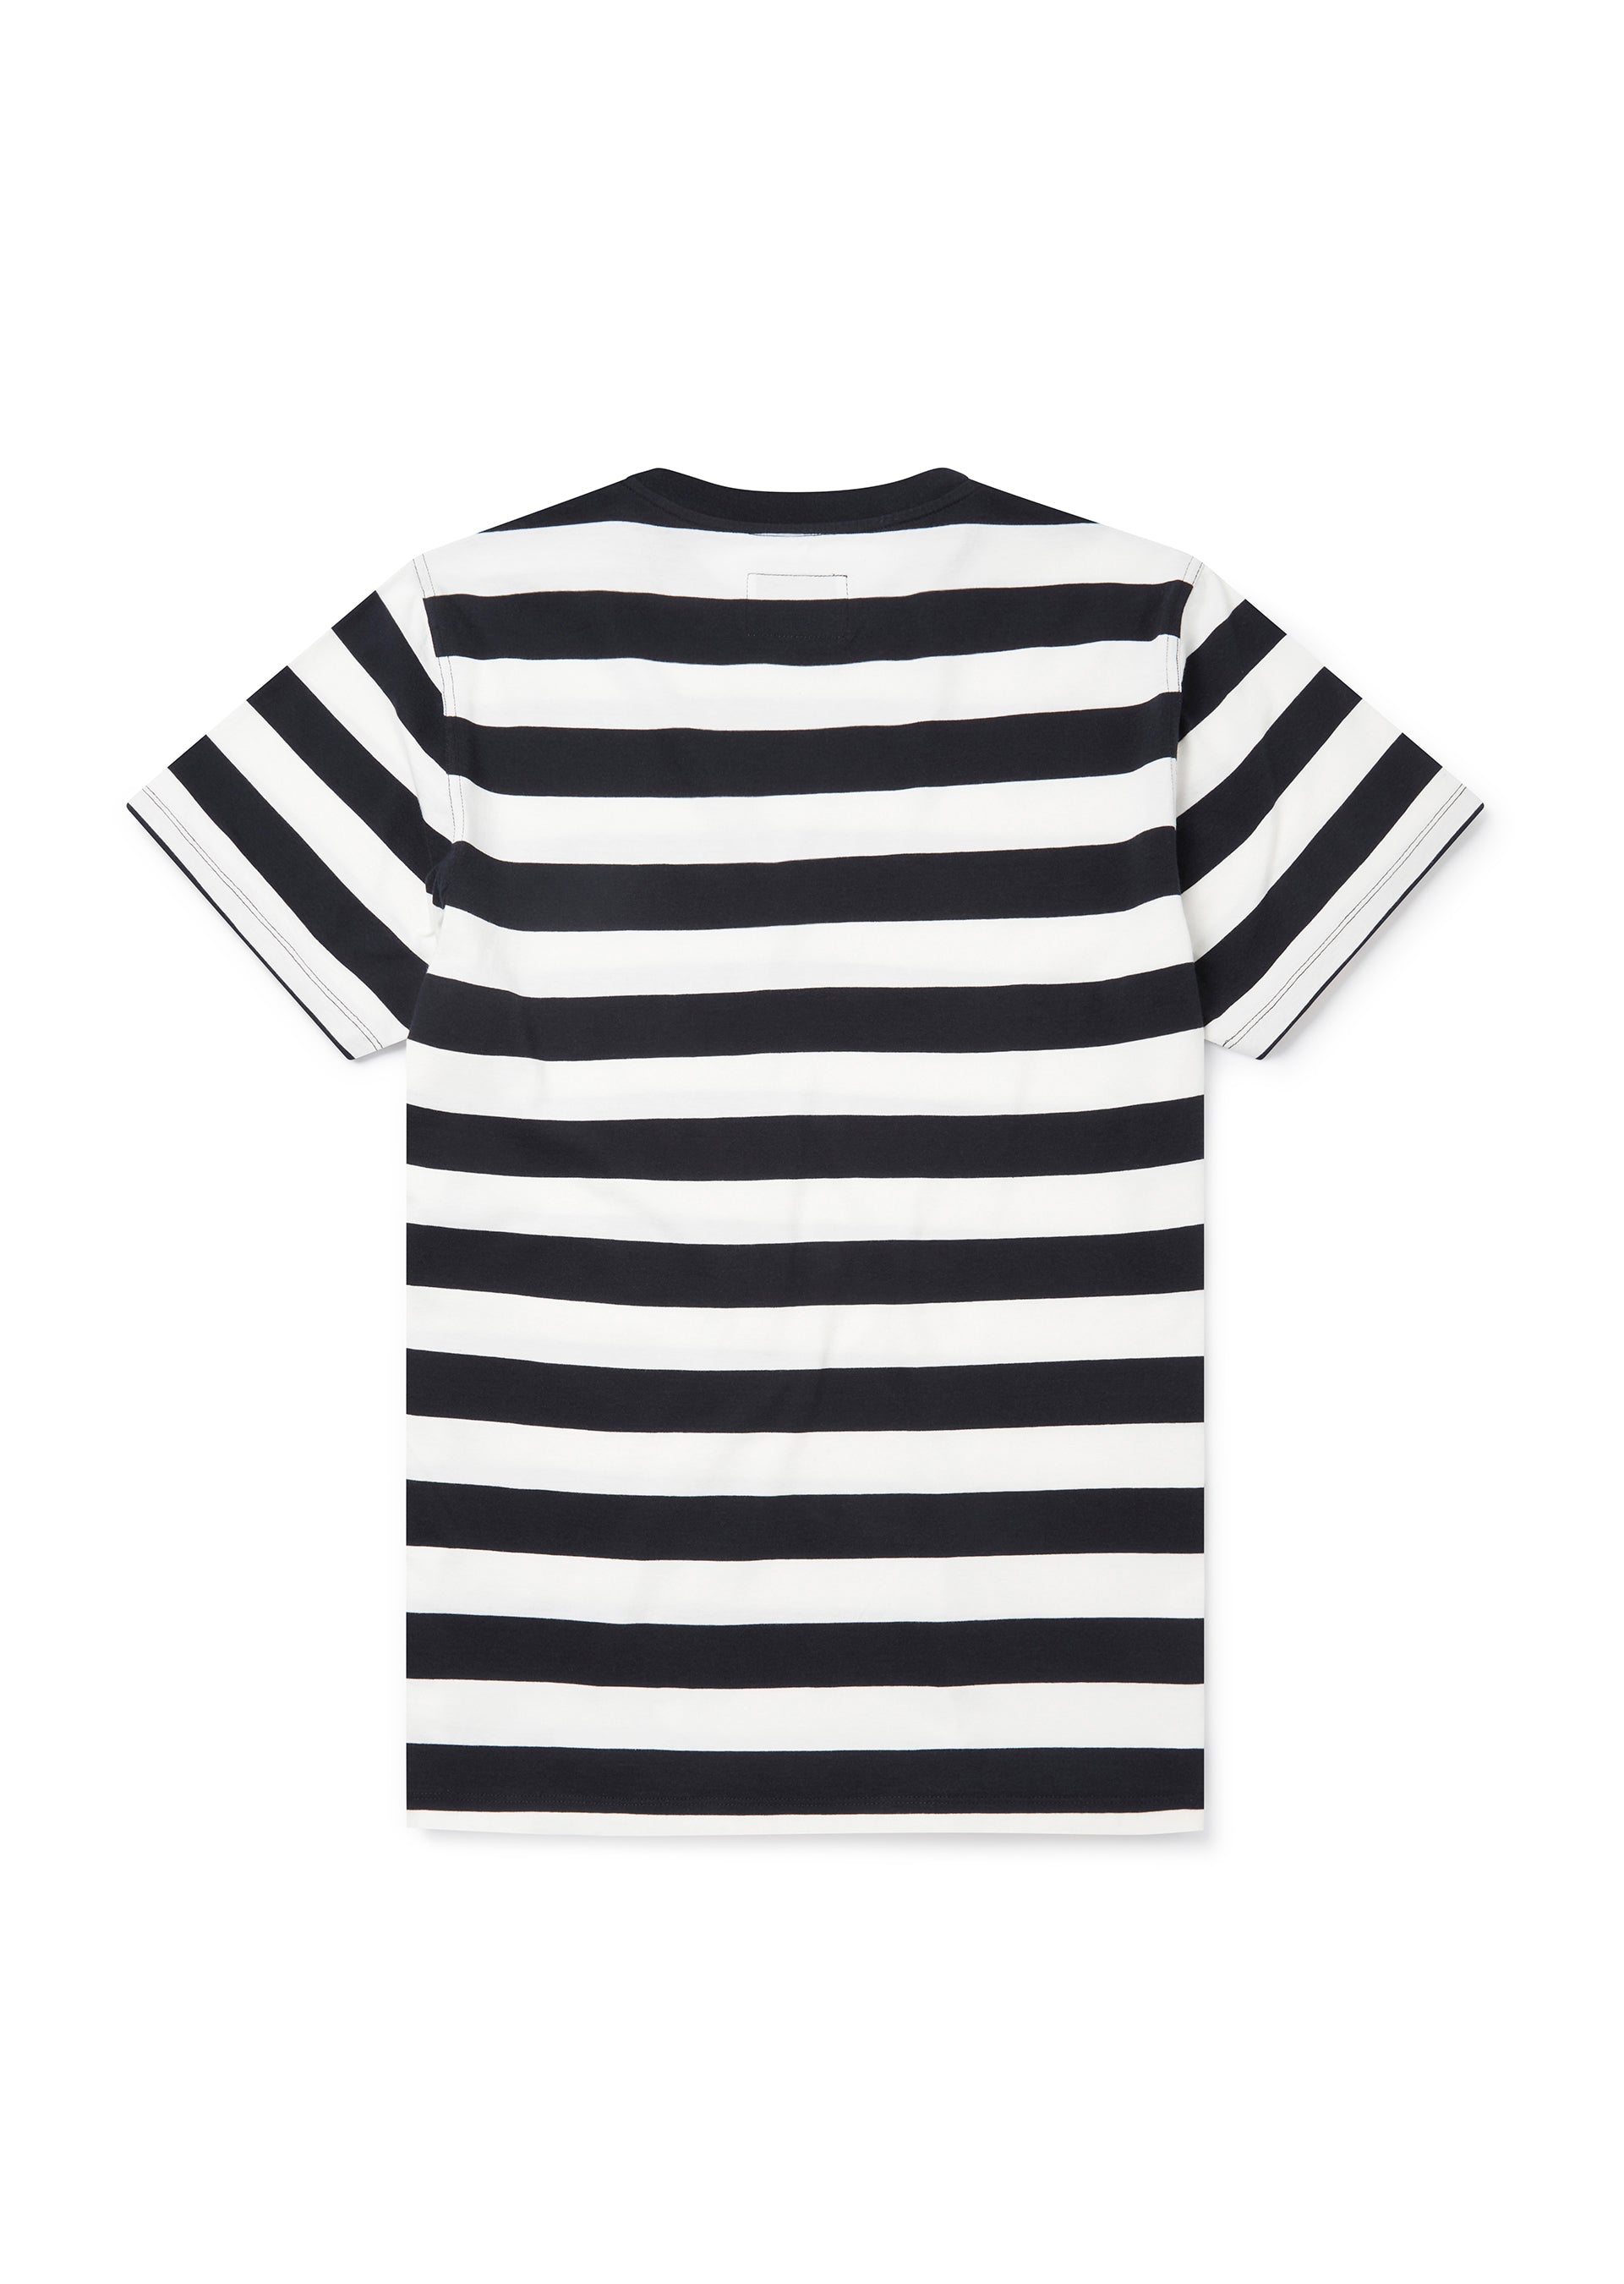 Picasso Stripe T-Shirt in Navy/Off-White | albam Clothing